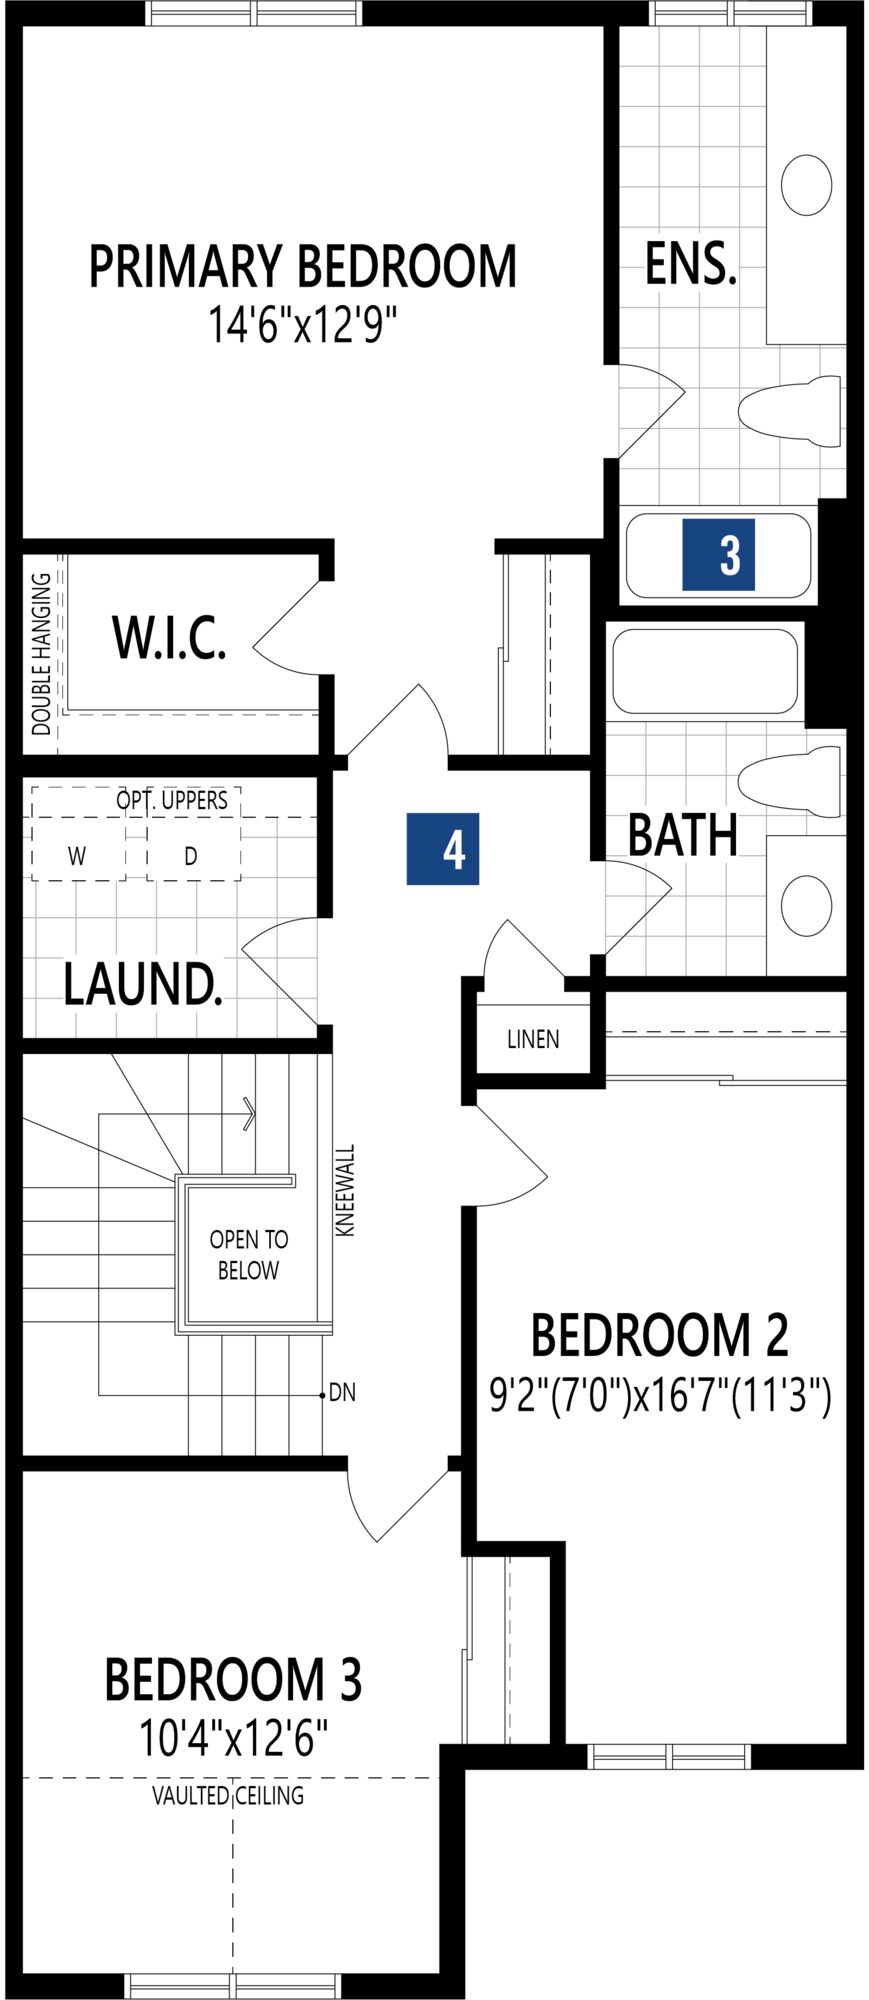 Oak Floor Plan of Half Moon Bay Towns with undefined beds